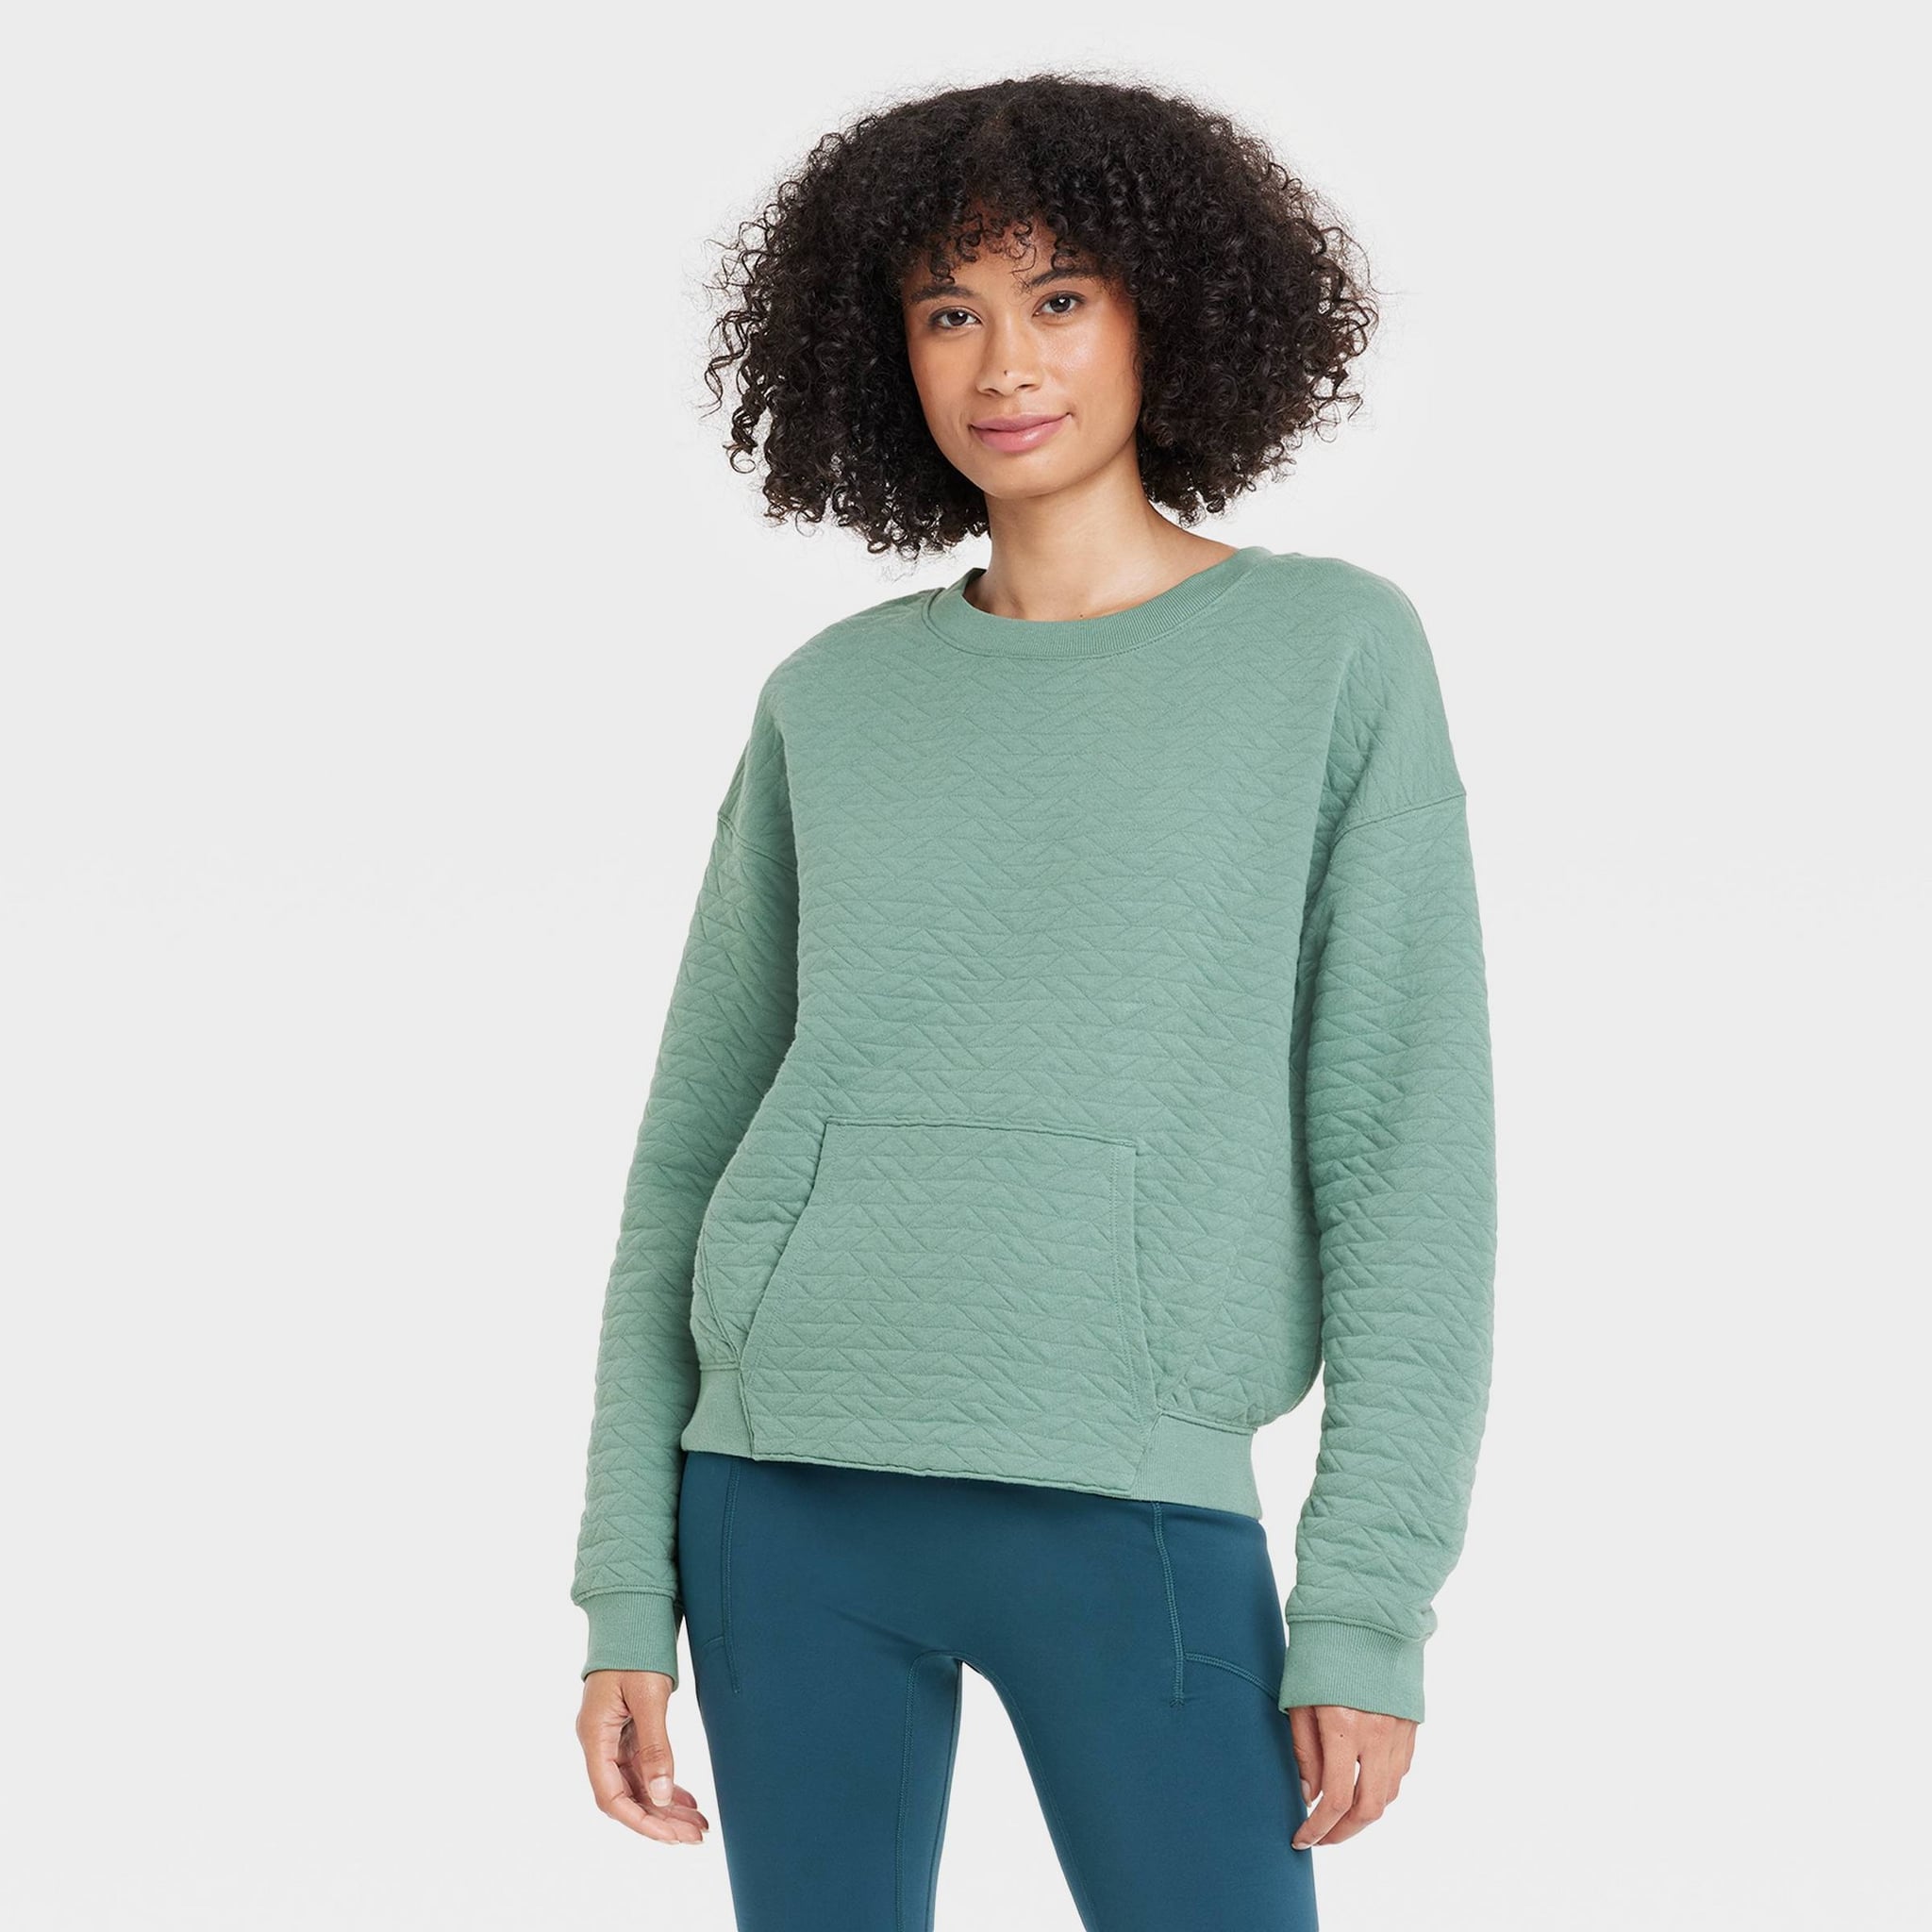 Best Black Friday Women's Apparel Deals at Target: All in Motion